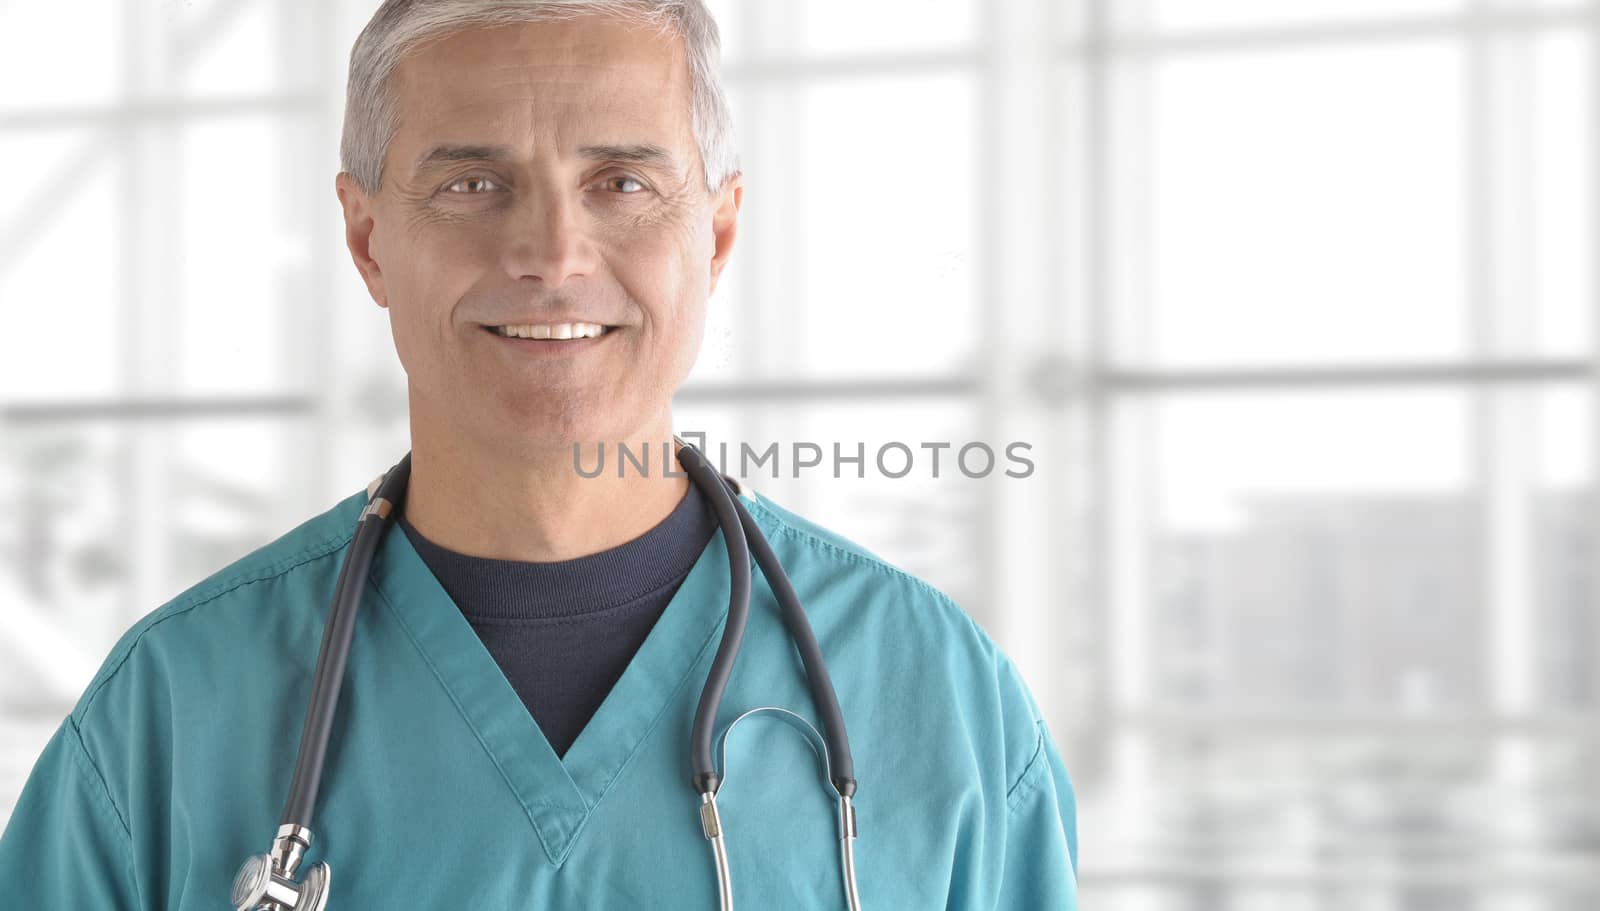 Portrait of smiling senior doctor standing against office window background while looking at camera.